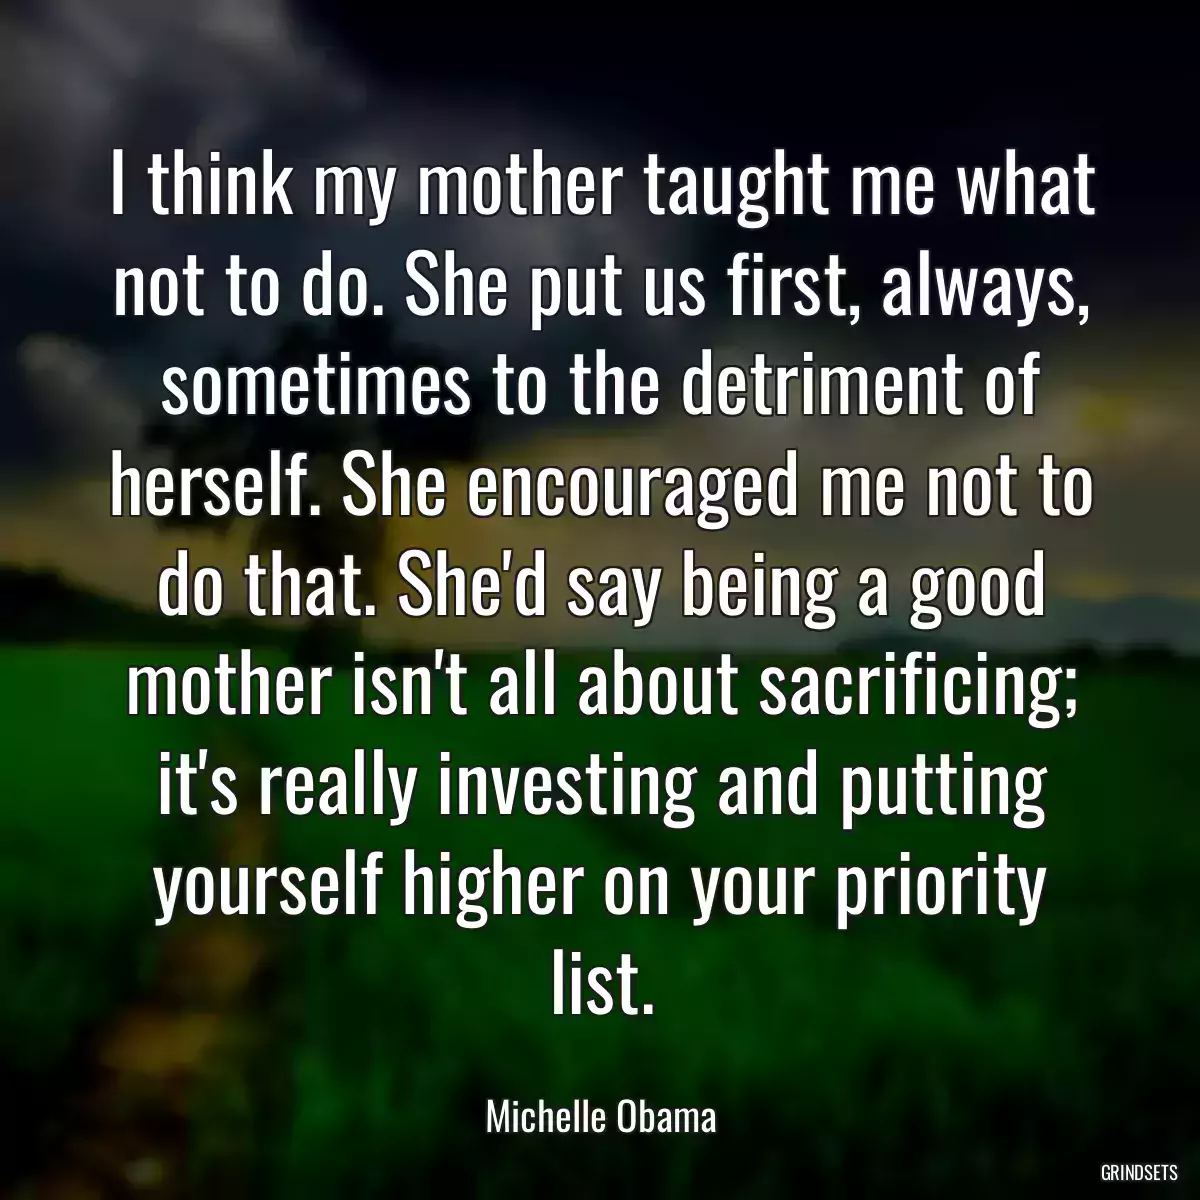 I think my mother taught me what not to do. She put us first, always, sometimes to the detriment of herself. She encouraged me not to do that. She\'d say being a good mother isn\'t all about sacrificing; it\'s really investing and putting yourself higher on your priority list.